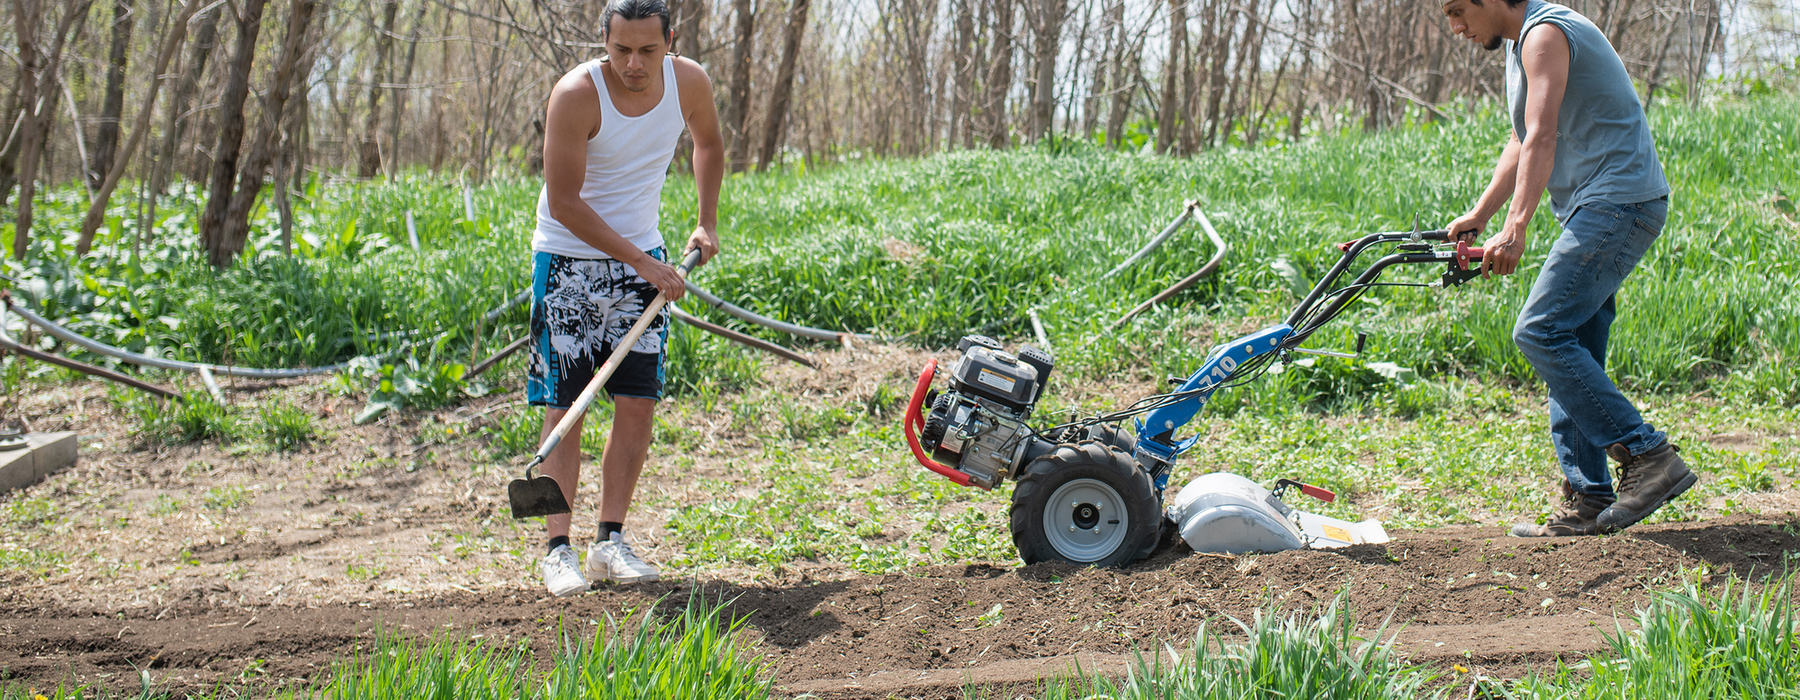 Two Native American men tilling a garden with a manual till and motorized tilling machine.